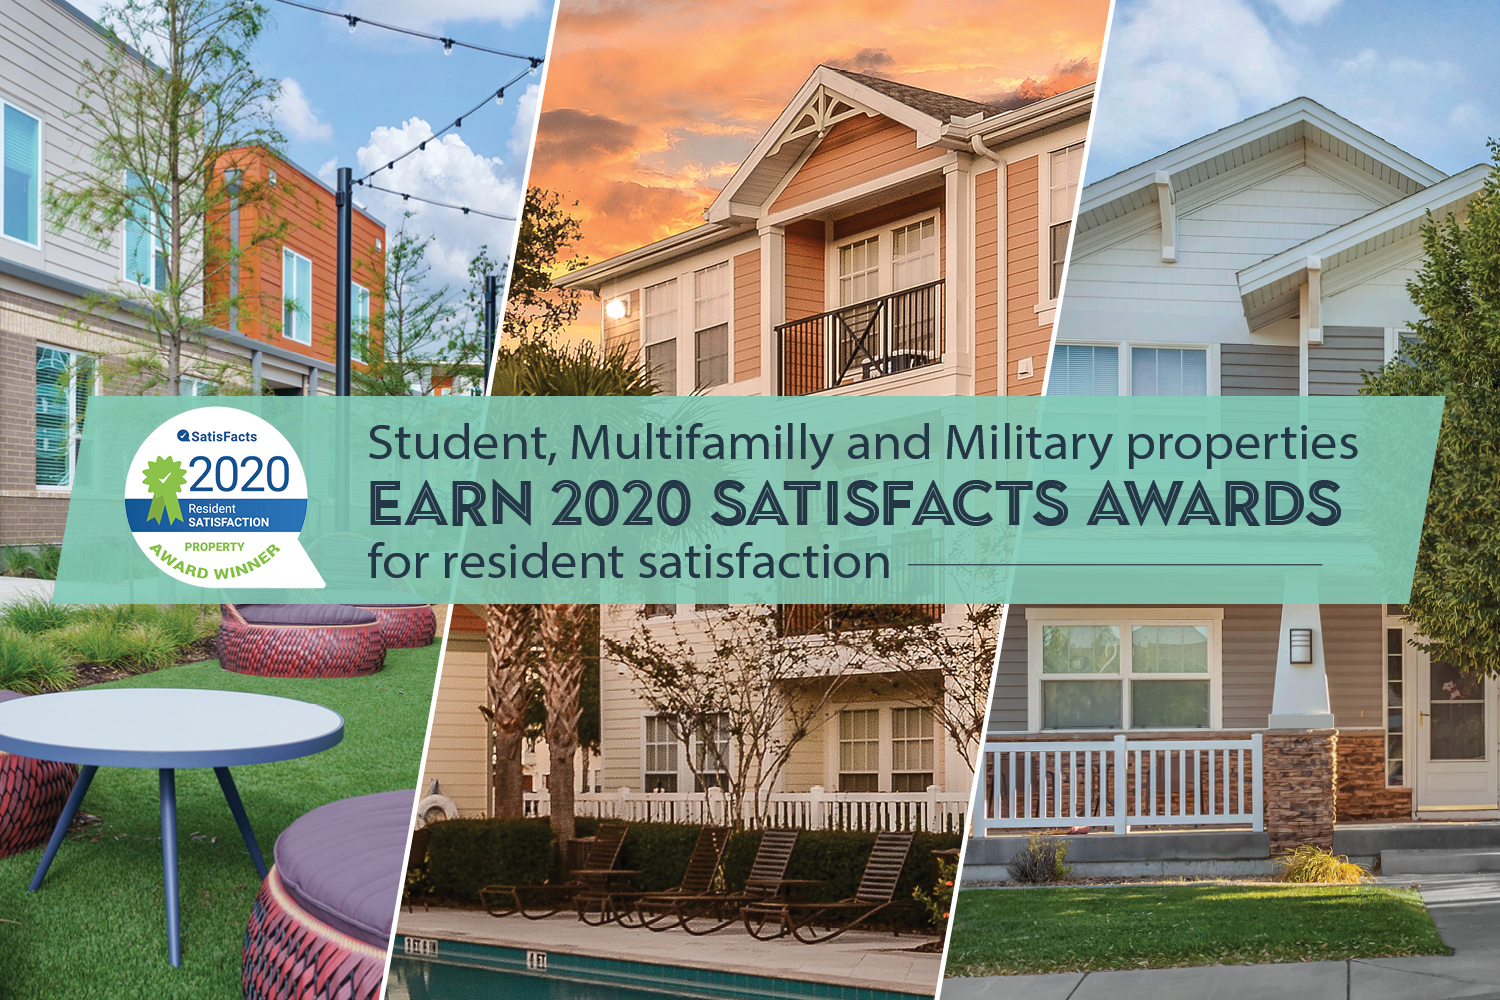 Student, Multifamily and Military properties earn 2020 SatisFacts Awards for resident satisfaction